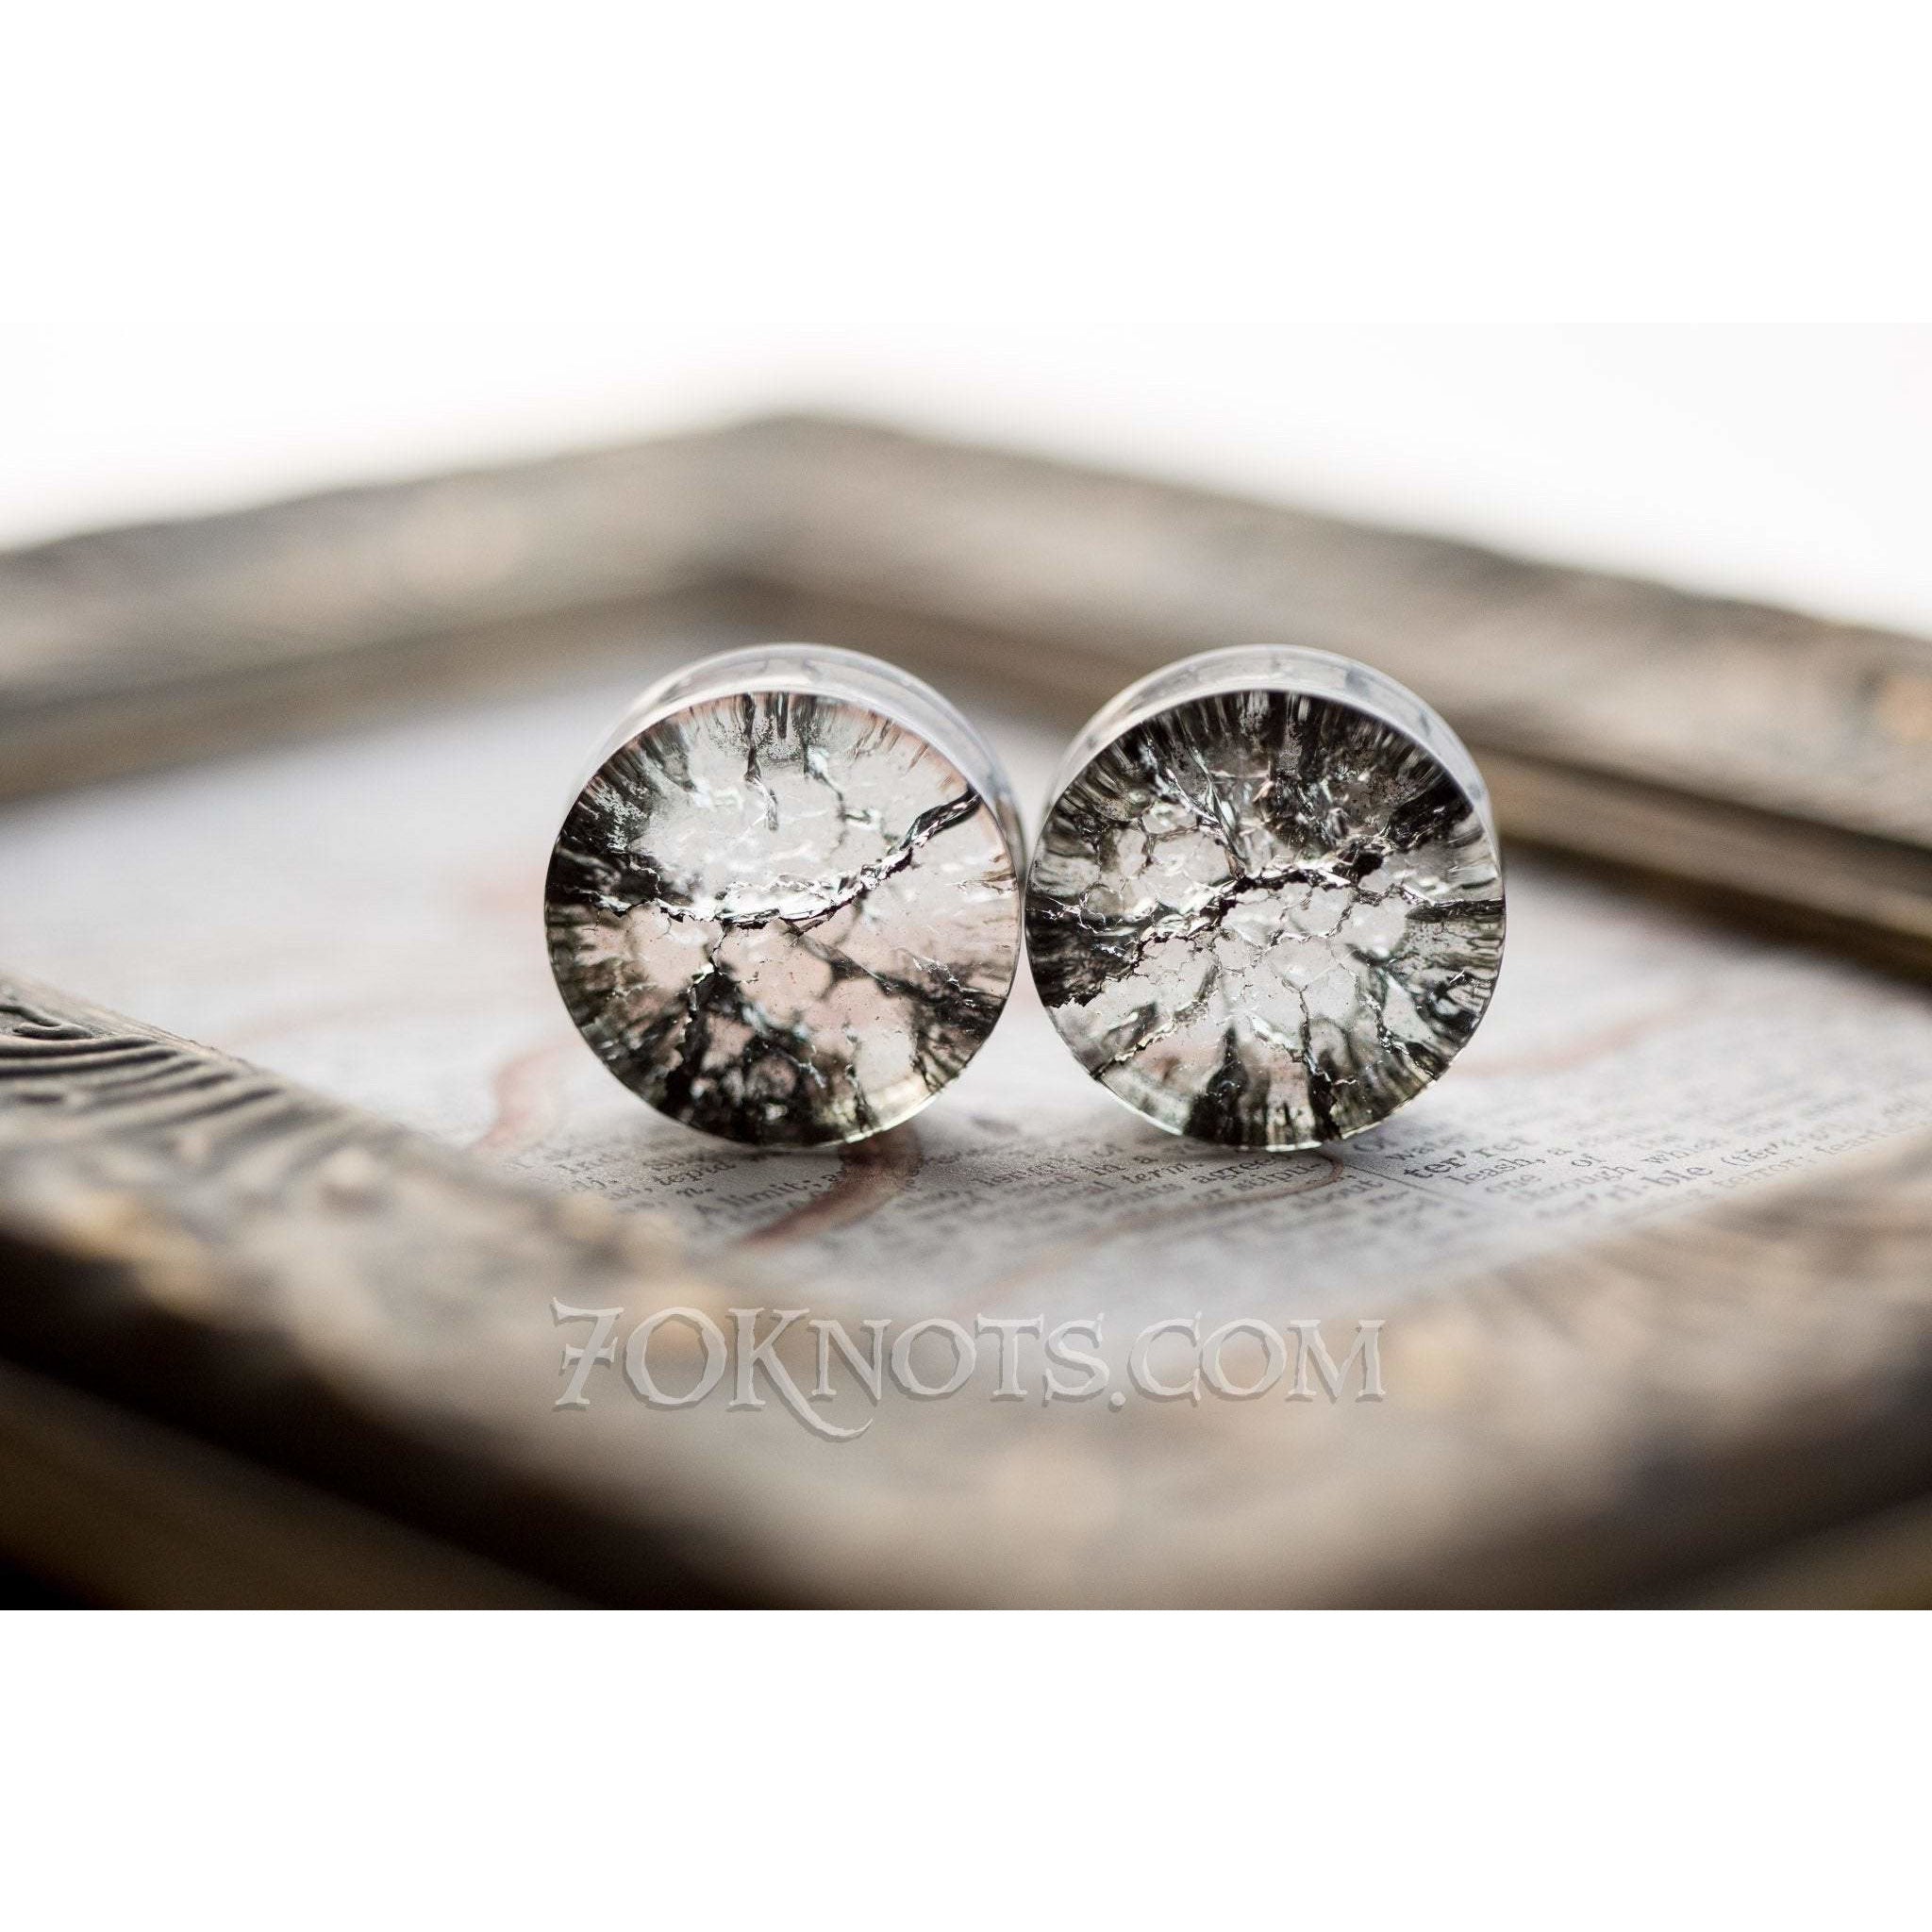 Black Cracked Glass Double Flared Plugs, Pair - 70 Knots